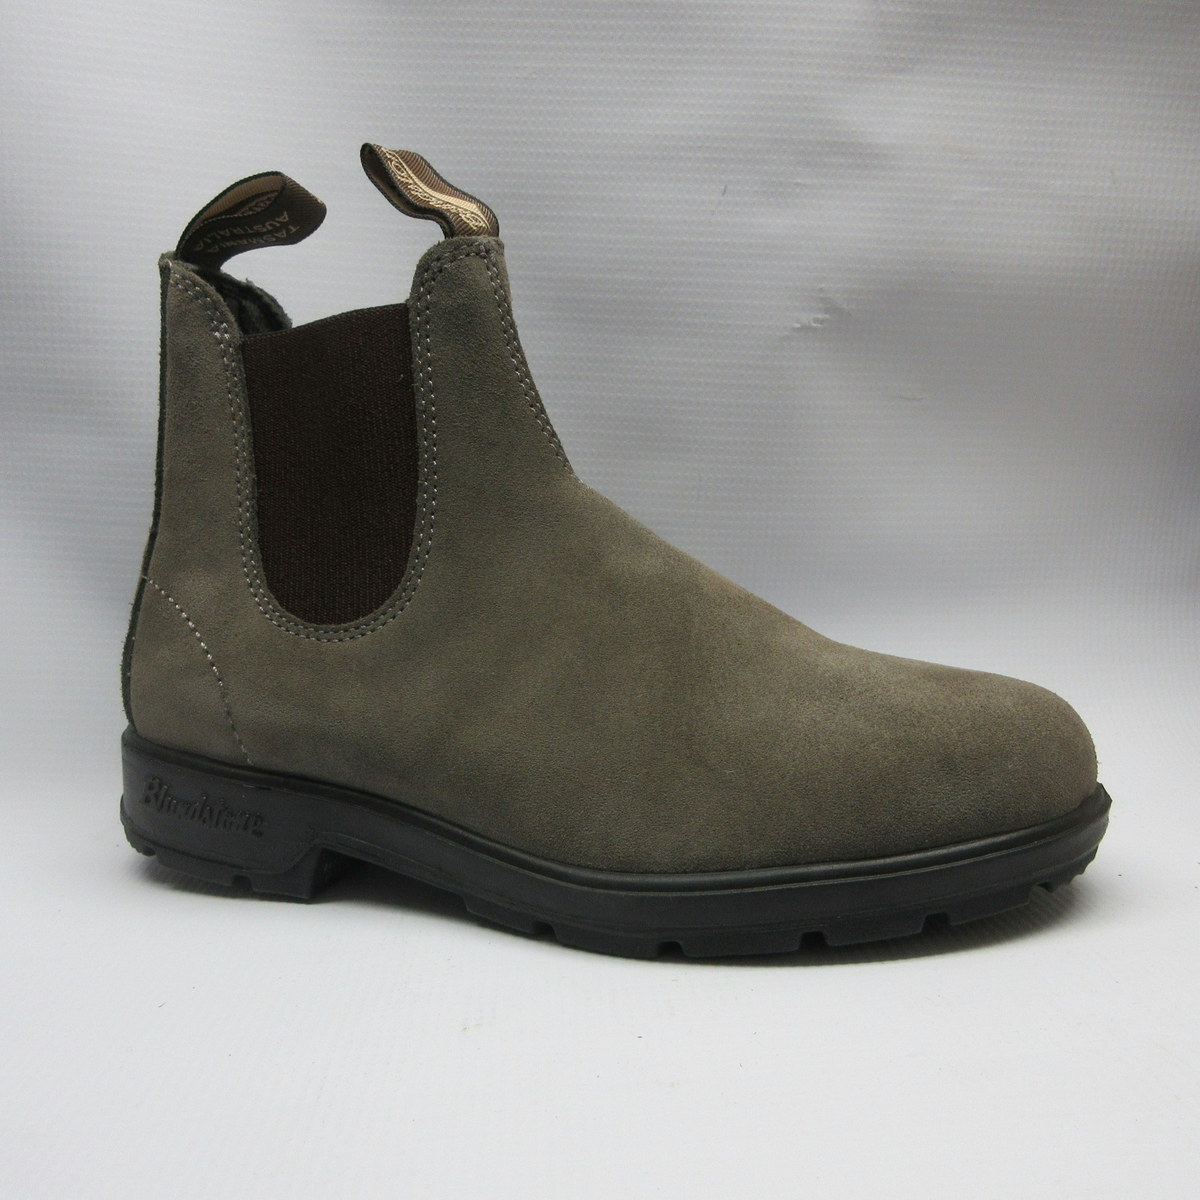 Blundstone Boots 1459 Lined Suede Boots 